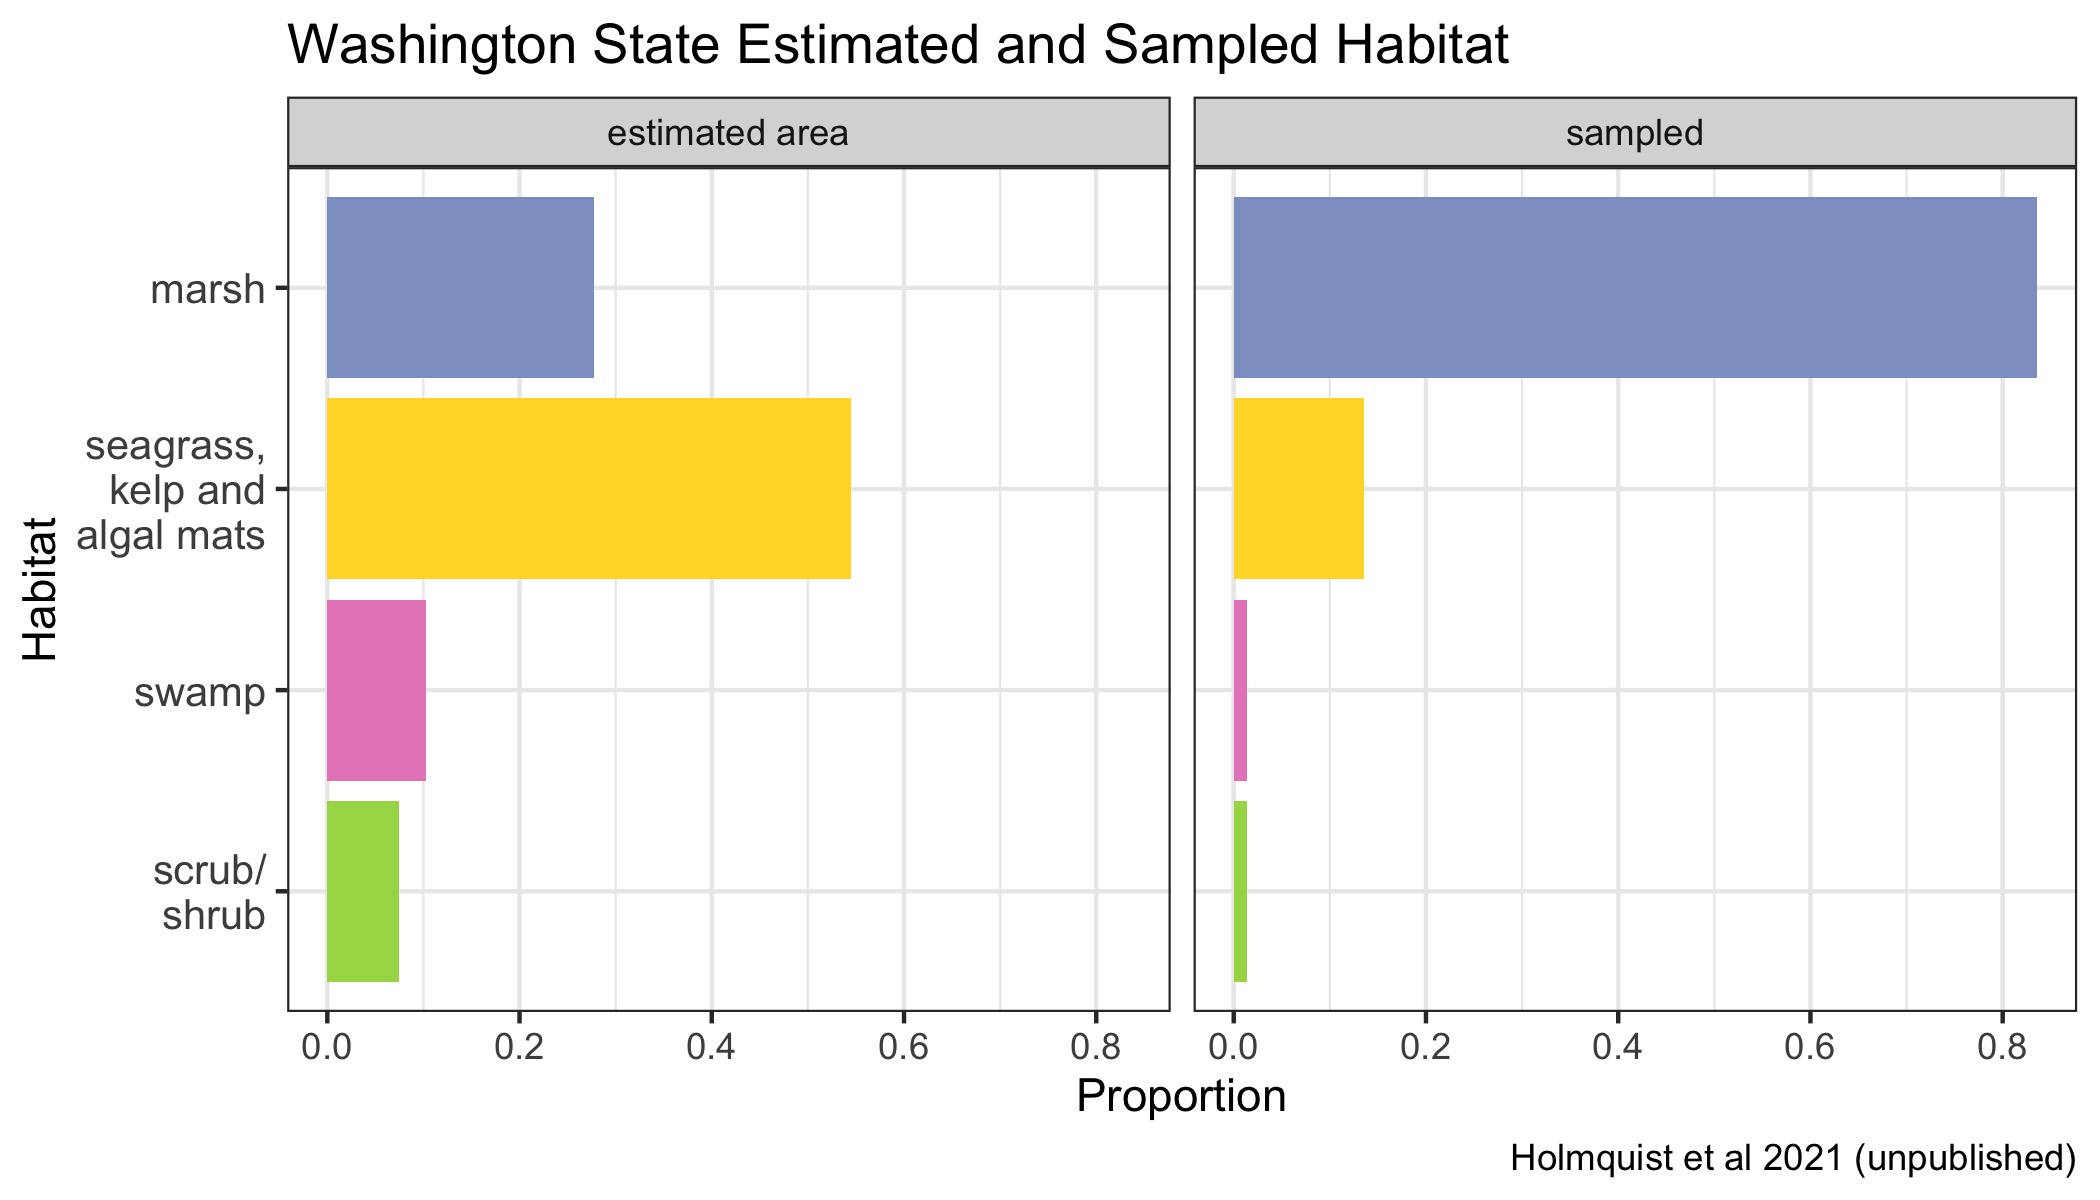 Proportions of various Blue Carbon habitats across Washington state represented in the dataset in proportion to their estimated area. Seagrasses, kelp beds and algal mats are all combined into a single category, because they are combined in the underlying mapping products.